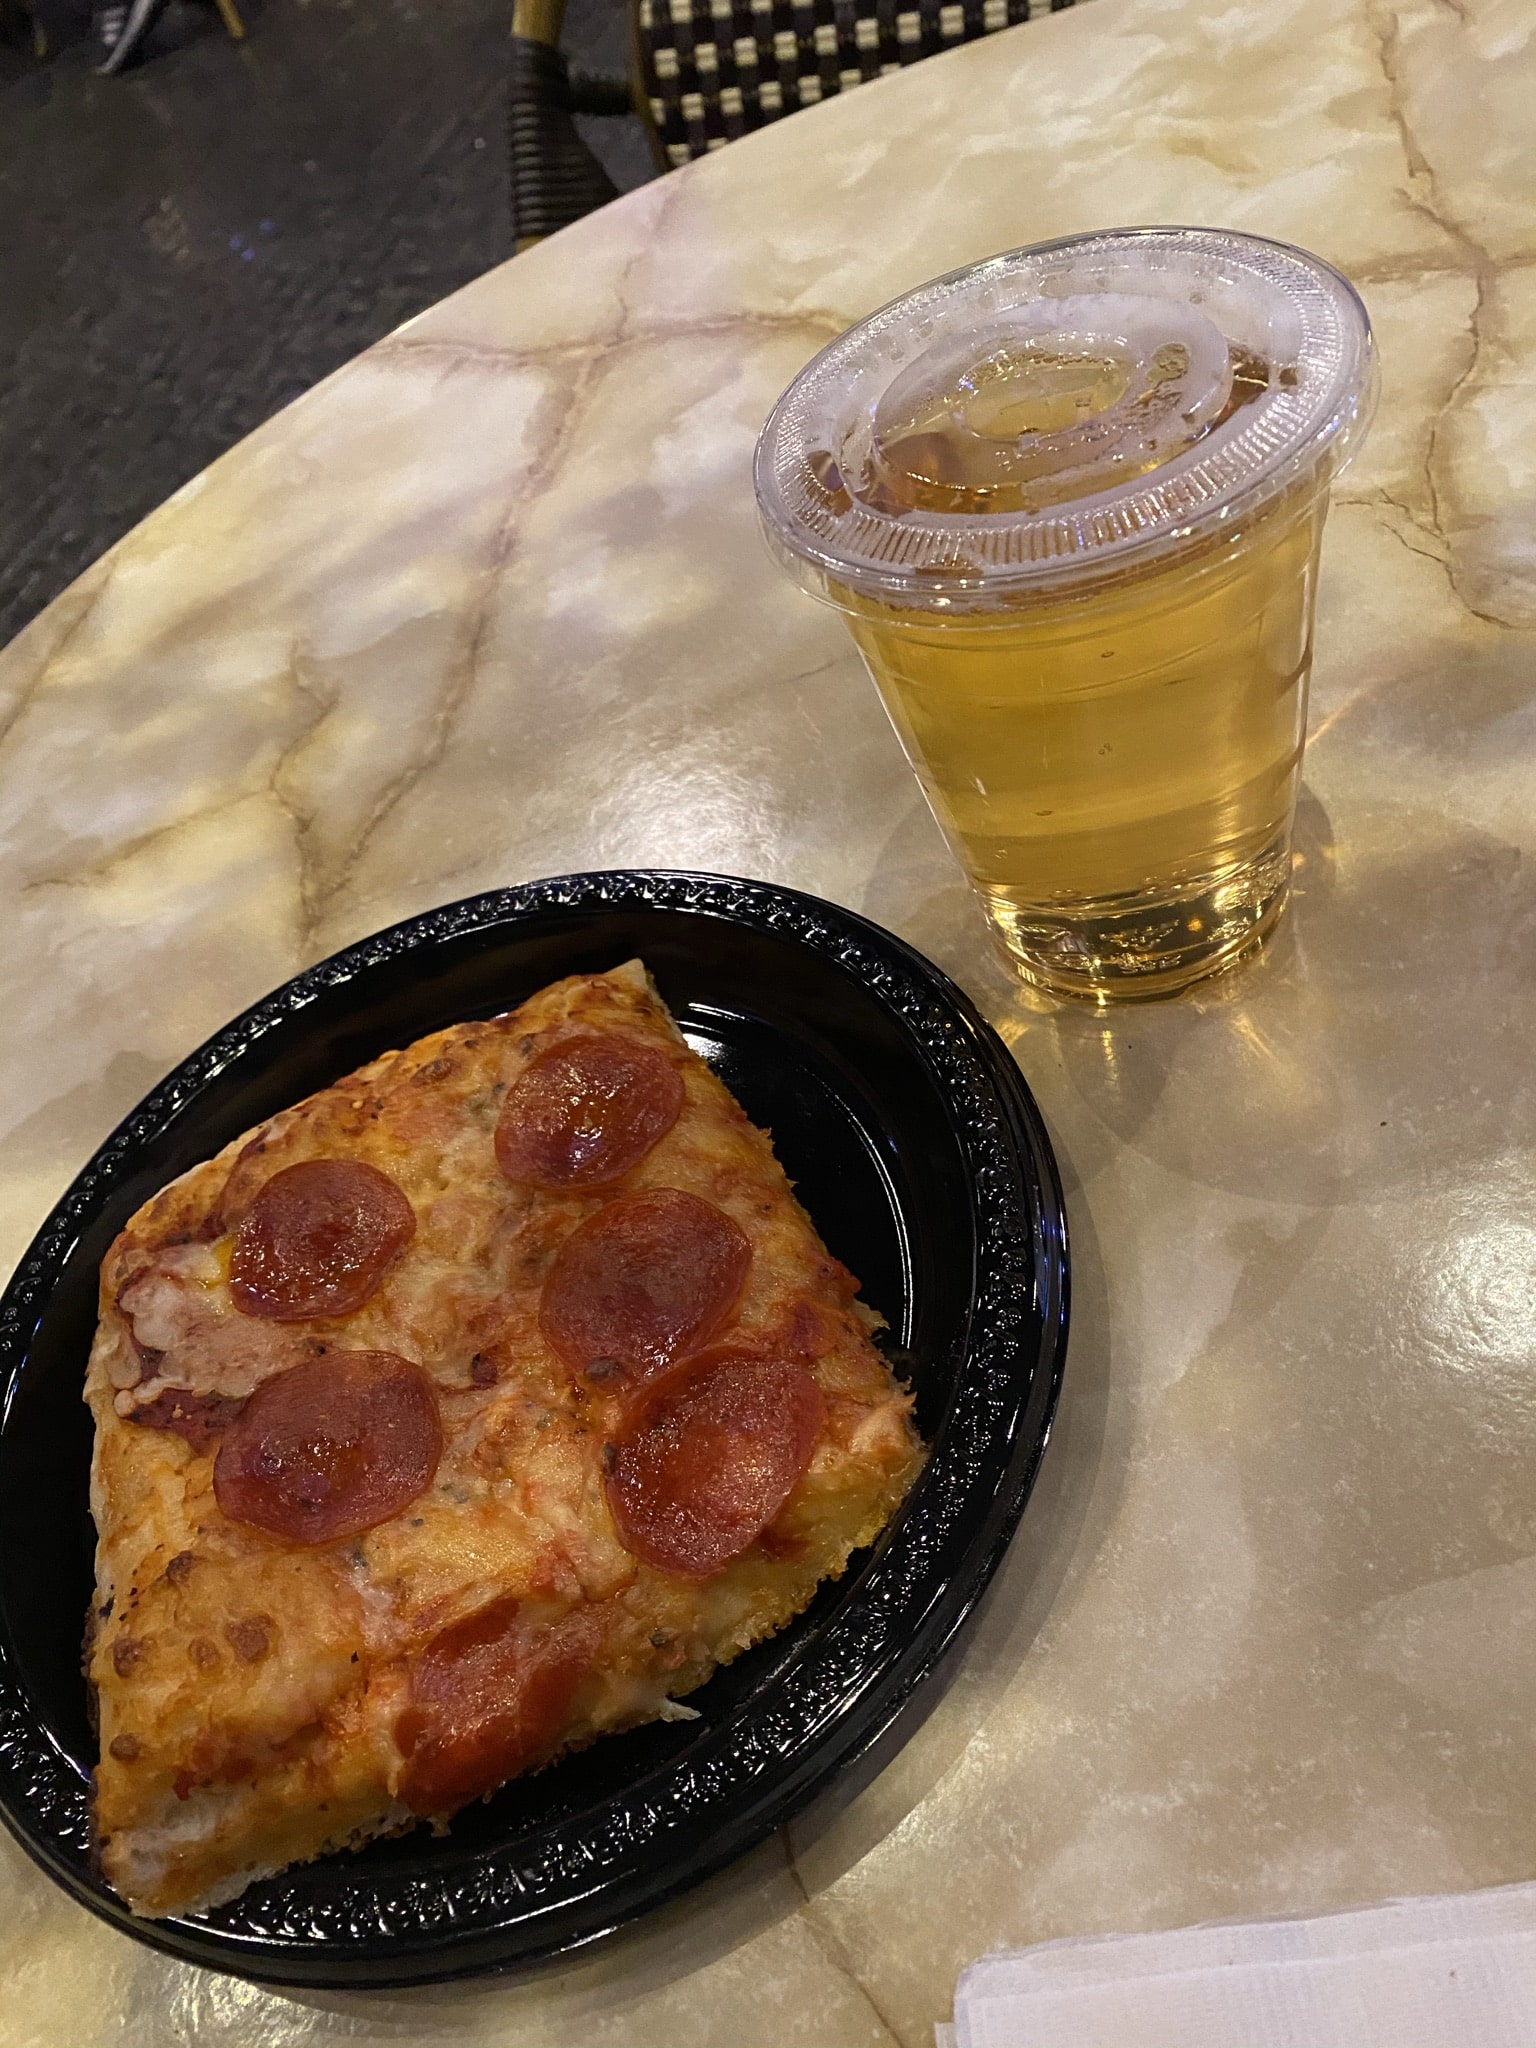 Sirrico's Pizza - slice of pizza and a glass of beer